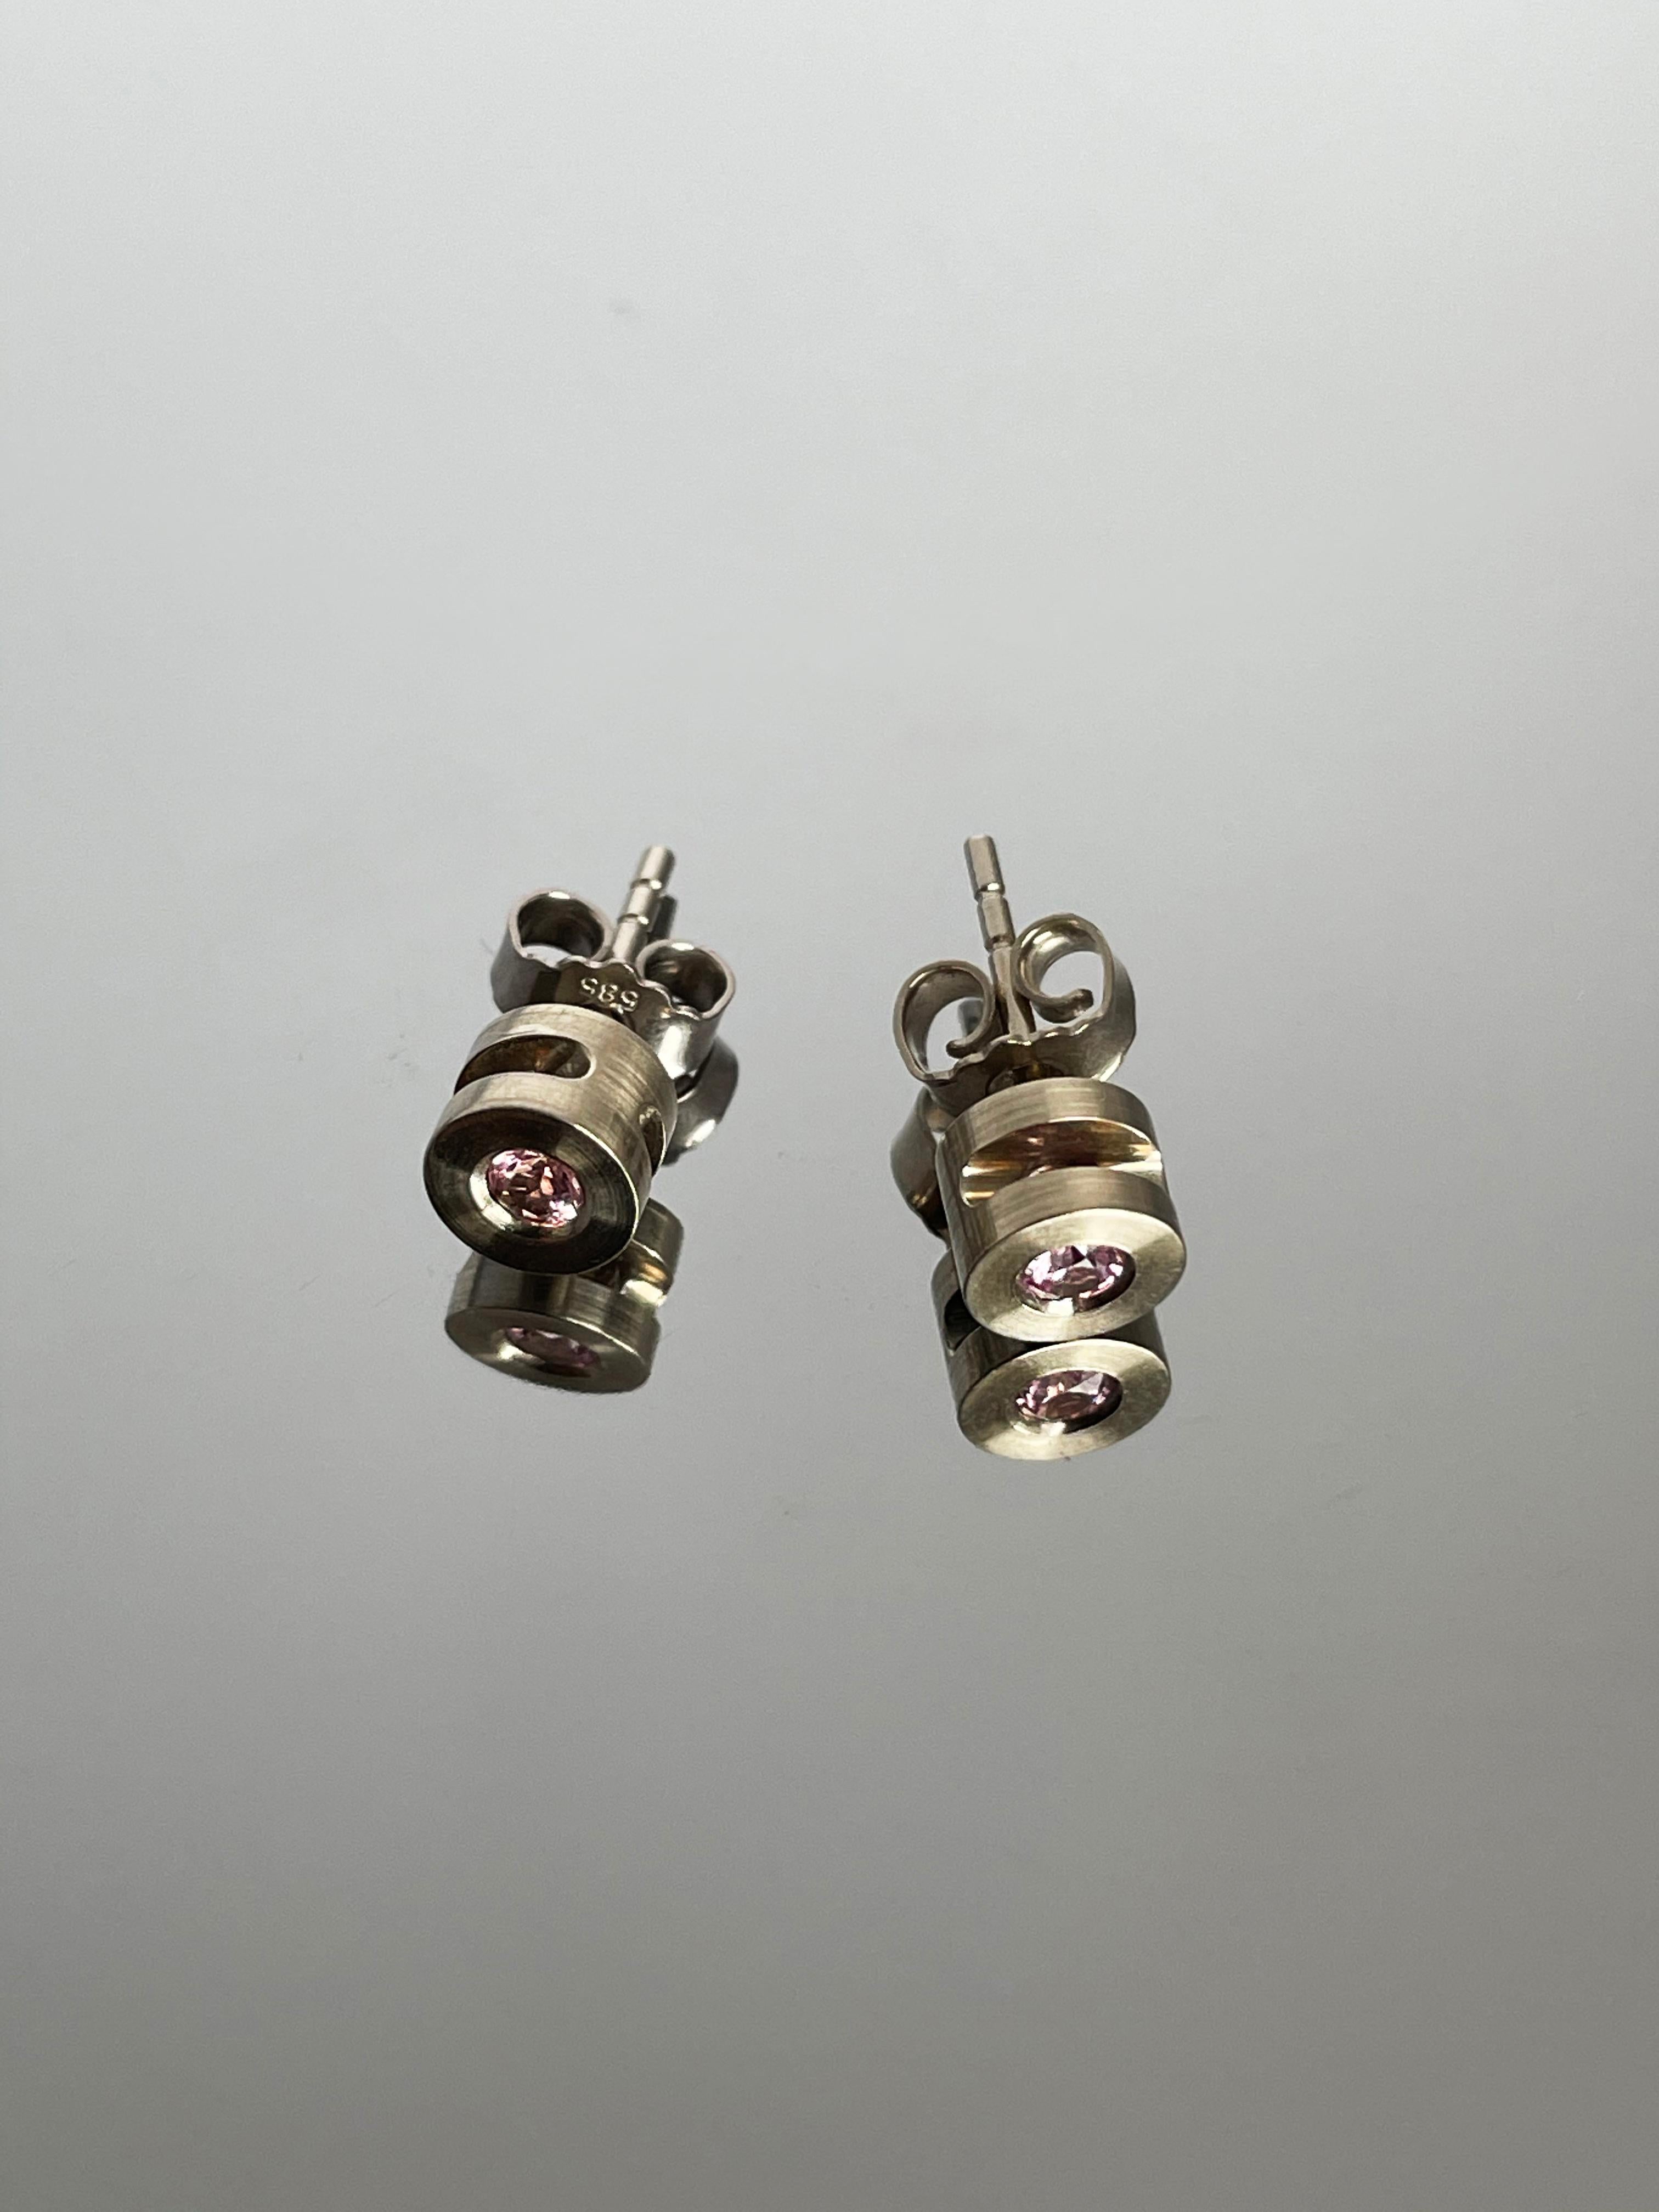 This entirely handcrafted piece of jewelry harmoniously combines the stunning white gold, the charm of pink tourmaline, and the all-encompassing subtle, non-binding jewelry design, making these earrings the fabulous, eye-catching detail to your